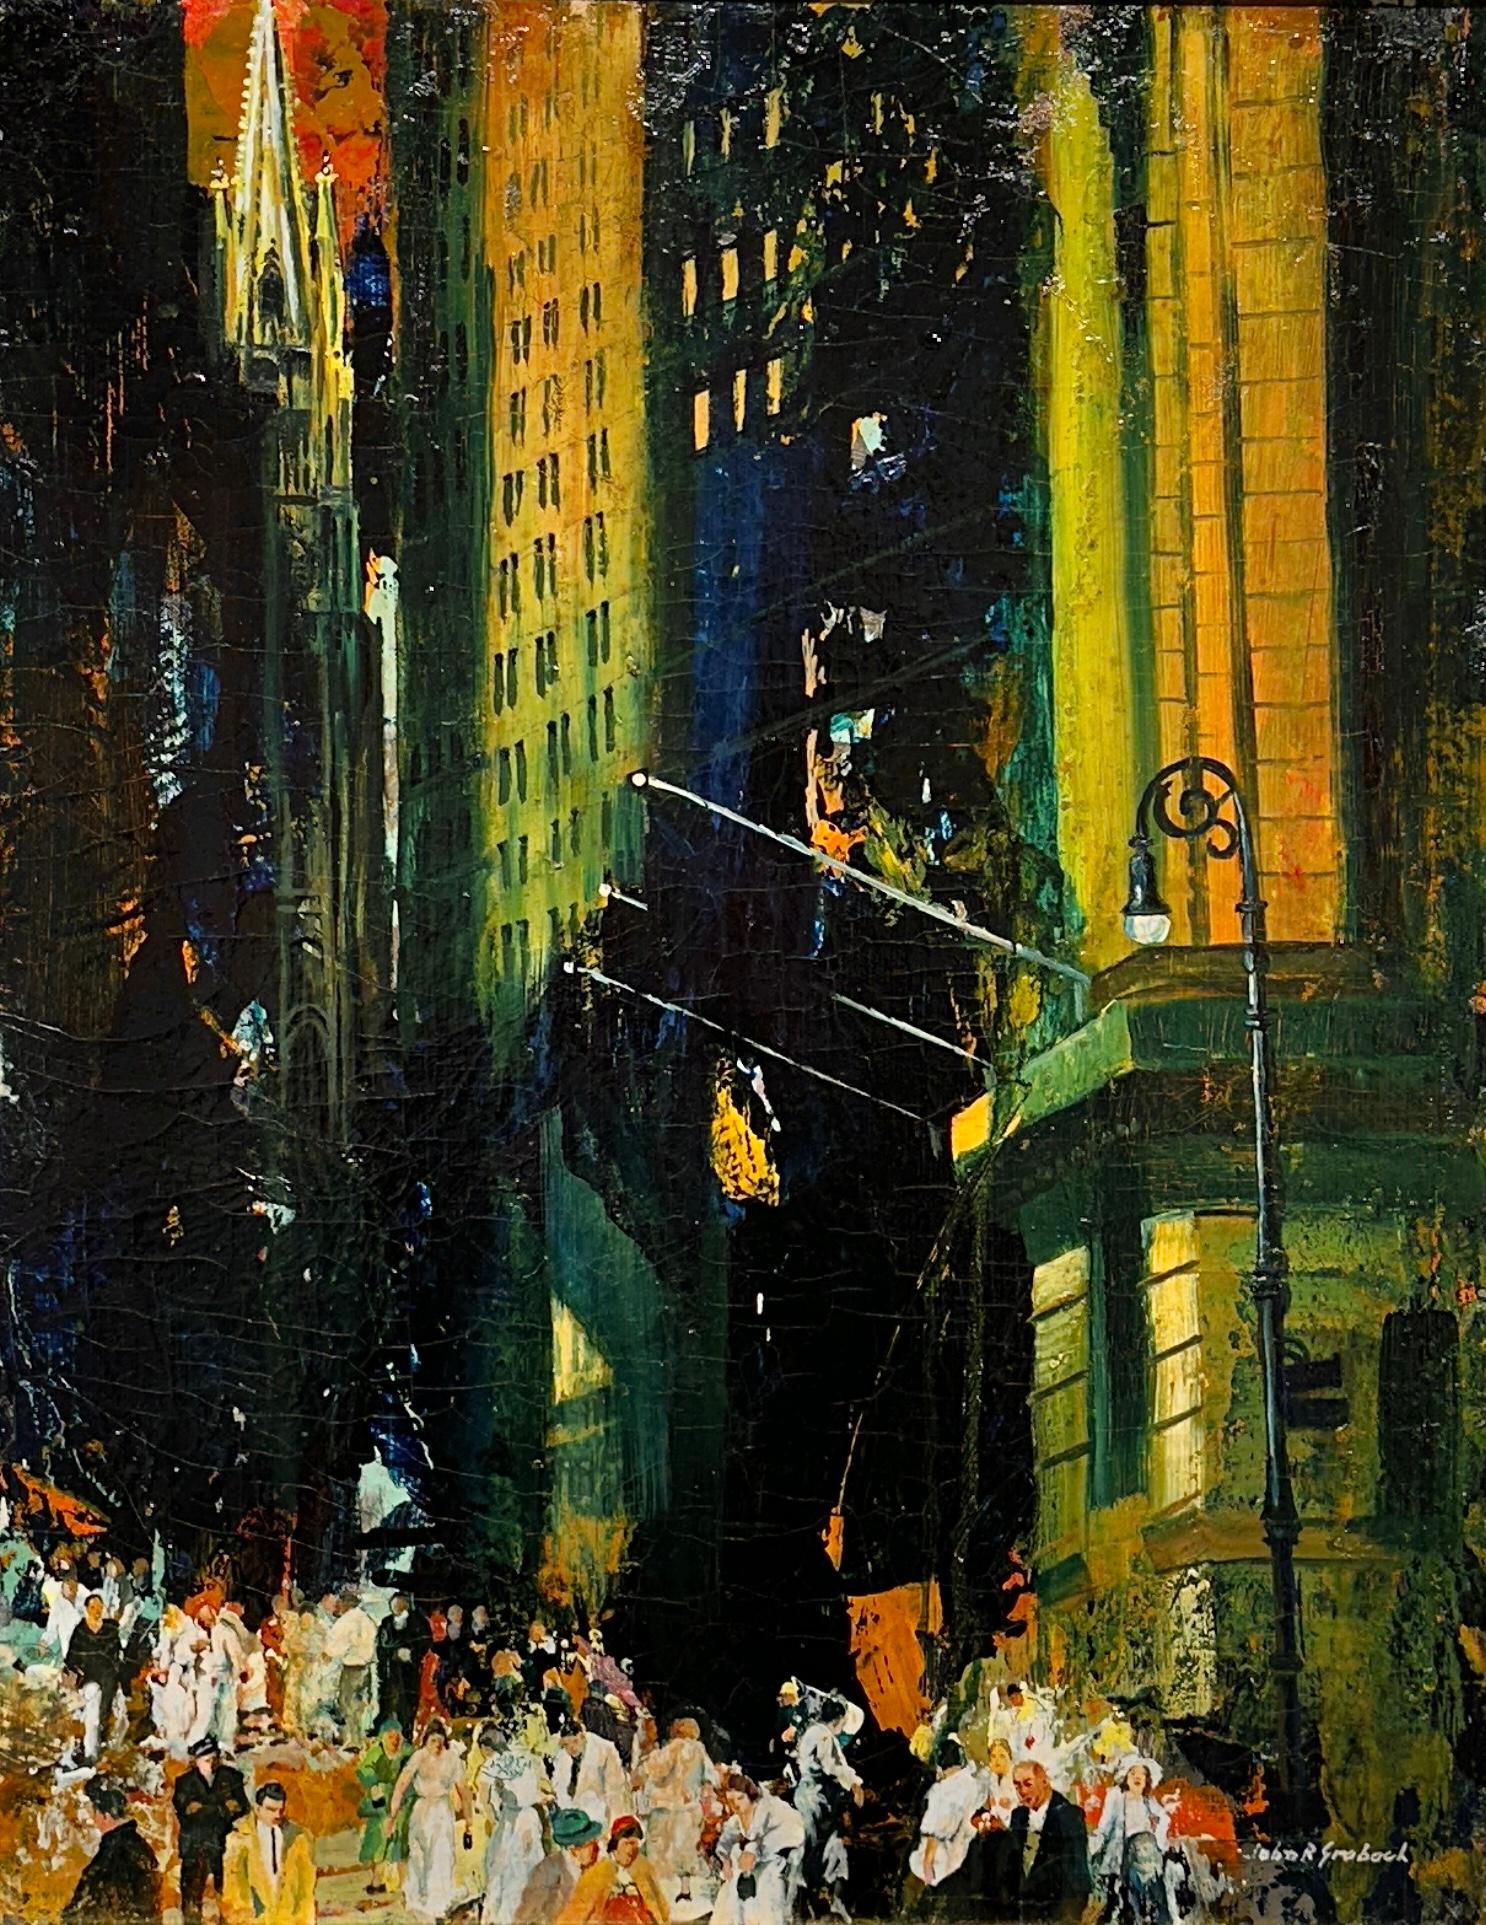 Great Wall Street piece by John R. Grabach (March 2, 1886 – March 17, 1981) with expressive colors and figures.

Grabach was a renowned American painter, best known for his evocative depictions of urban working-class life in New York City and New